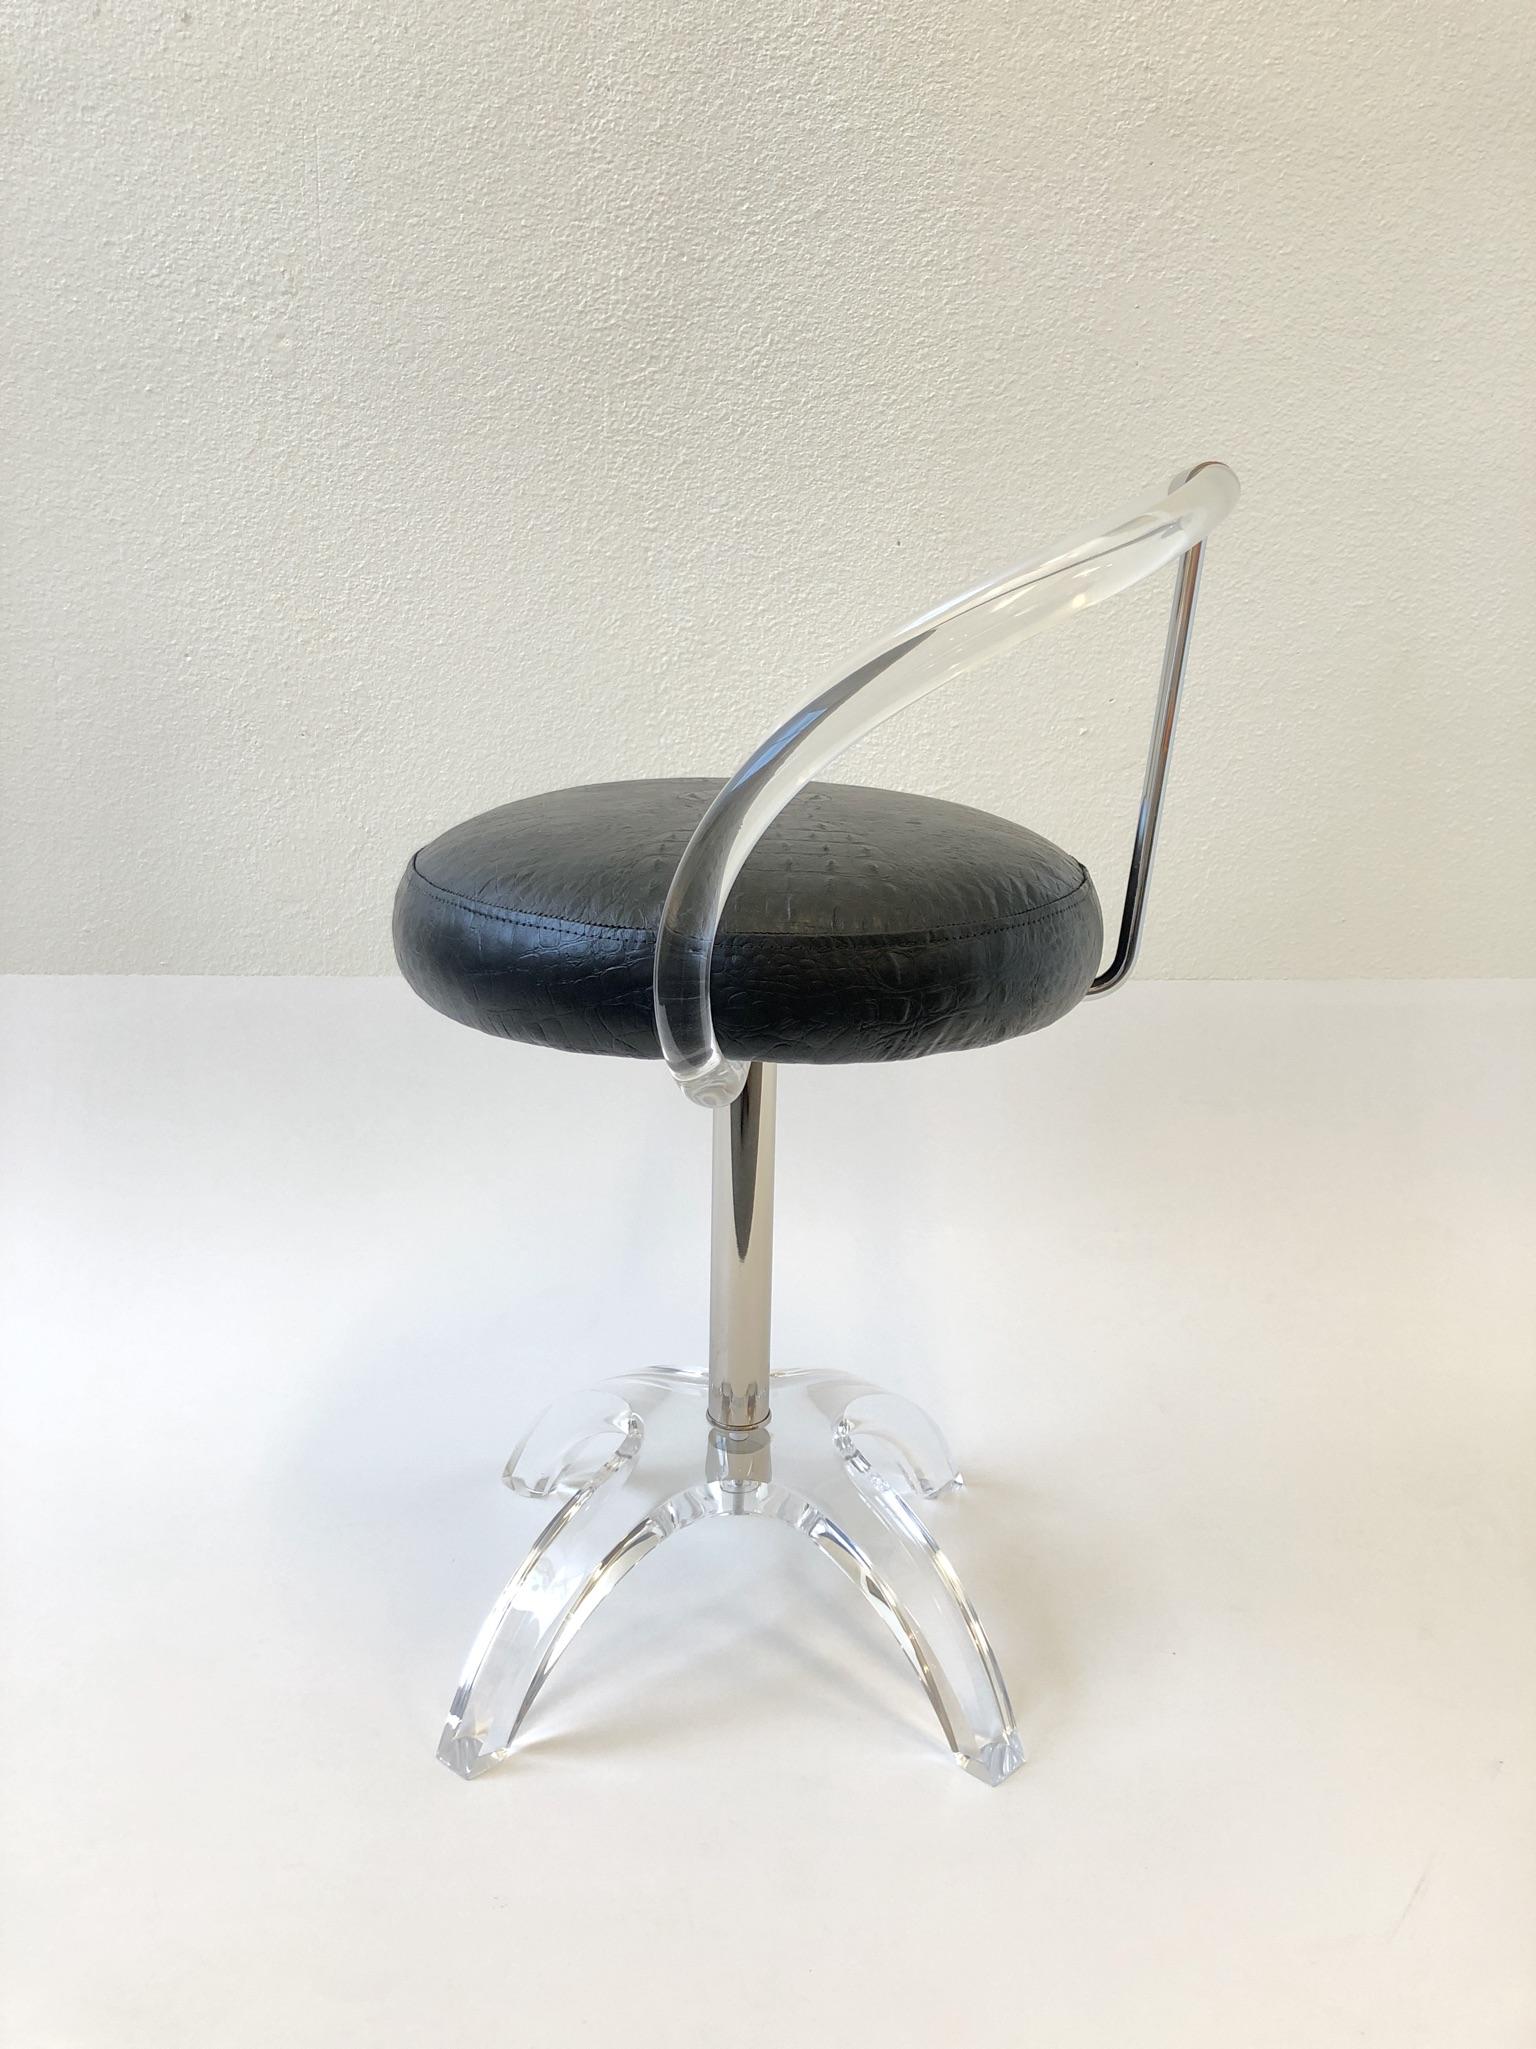 A glamorous polish nickel and clear acrylic swivel vanity stool. Design by Charles Hollis Jones in 1965 ( commission by Lucille Ball ). 
The stool has been newly restored. The seat is covered with a black distressed faux crocodile embossed leather.